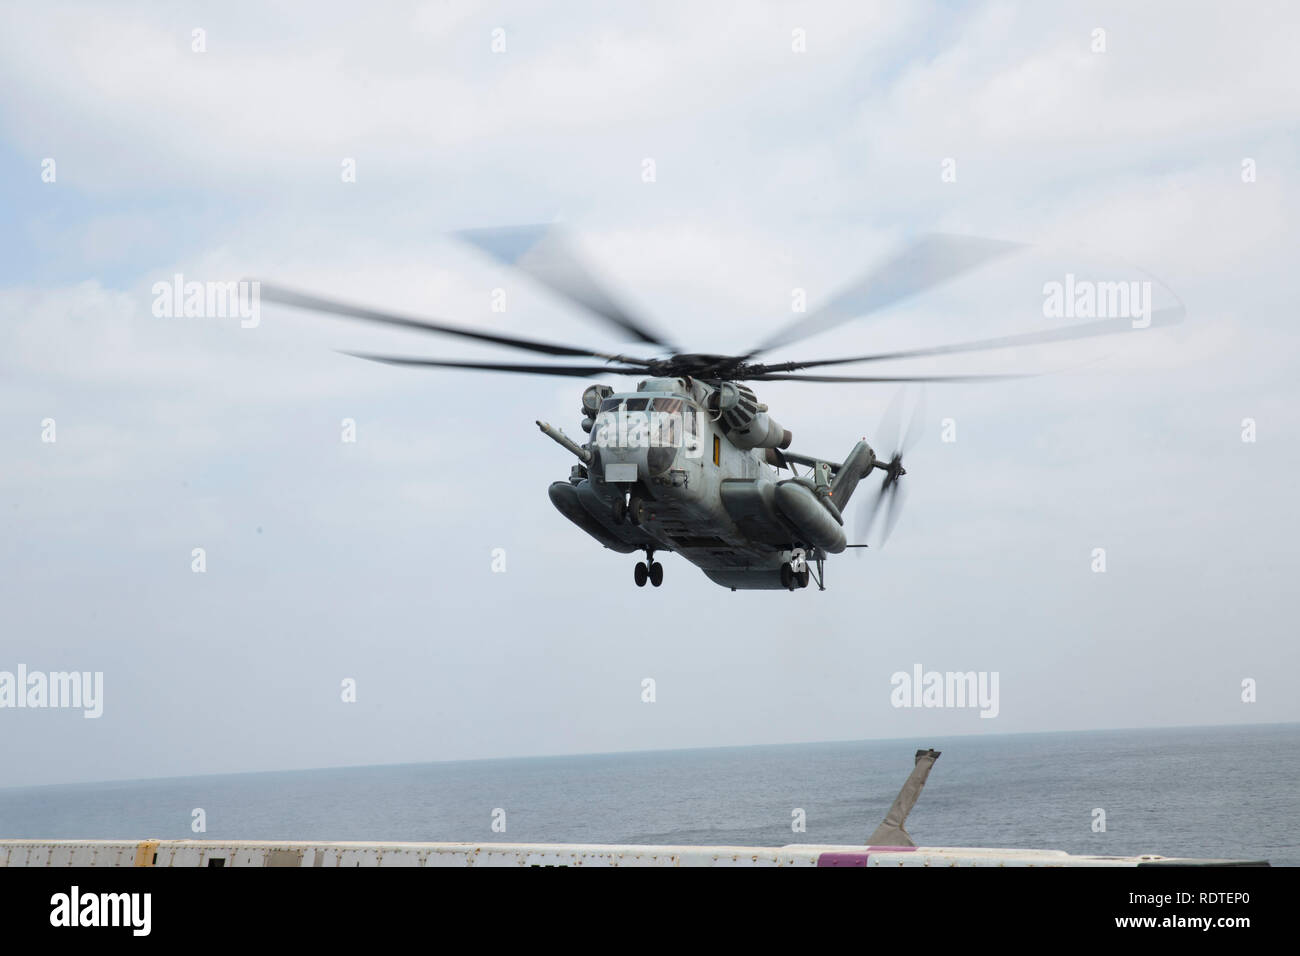 A U.S. Marine Corps CH-53E Super Stallion with Marine Medium Tiltrotor Squadron 166 Reinforced, 13th Marine Expeditionary Unit (MEU), prepares to land aboard the San Antonio-class amphibious transport dock USS Anchorage (LPD 23), Jan. 16, 2019. The Essex Amphibious Ready Group and the 13th MEU are deployed to the U.S. 5th fleet area of operations in support of naval operations to ensure maritime stability and security in the Central Region, connecting the Mediterranean and the Pacific through the western Indian Ocean and three strategic choke points. (U.S. Marine Corps photo by Sgt. Victoria D Stock Photo